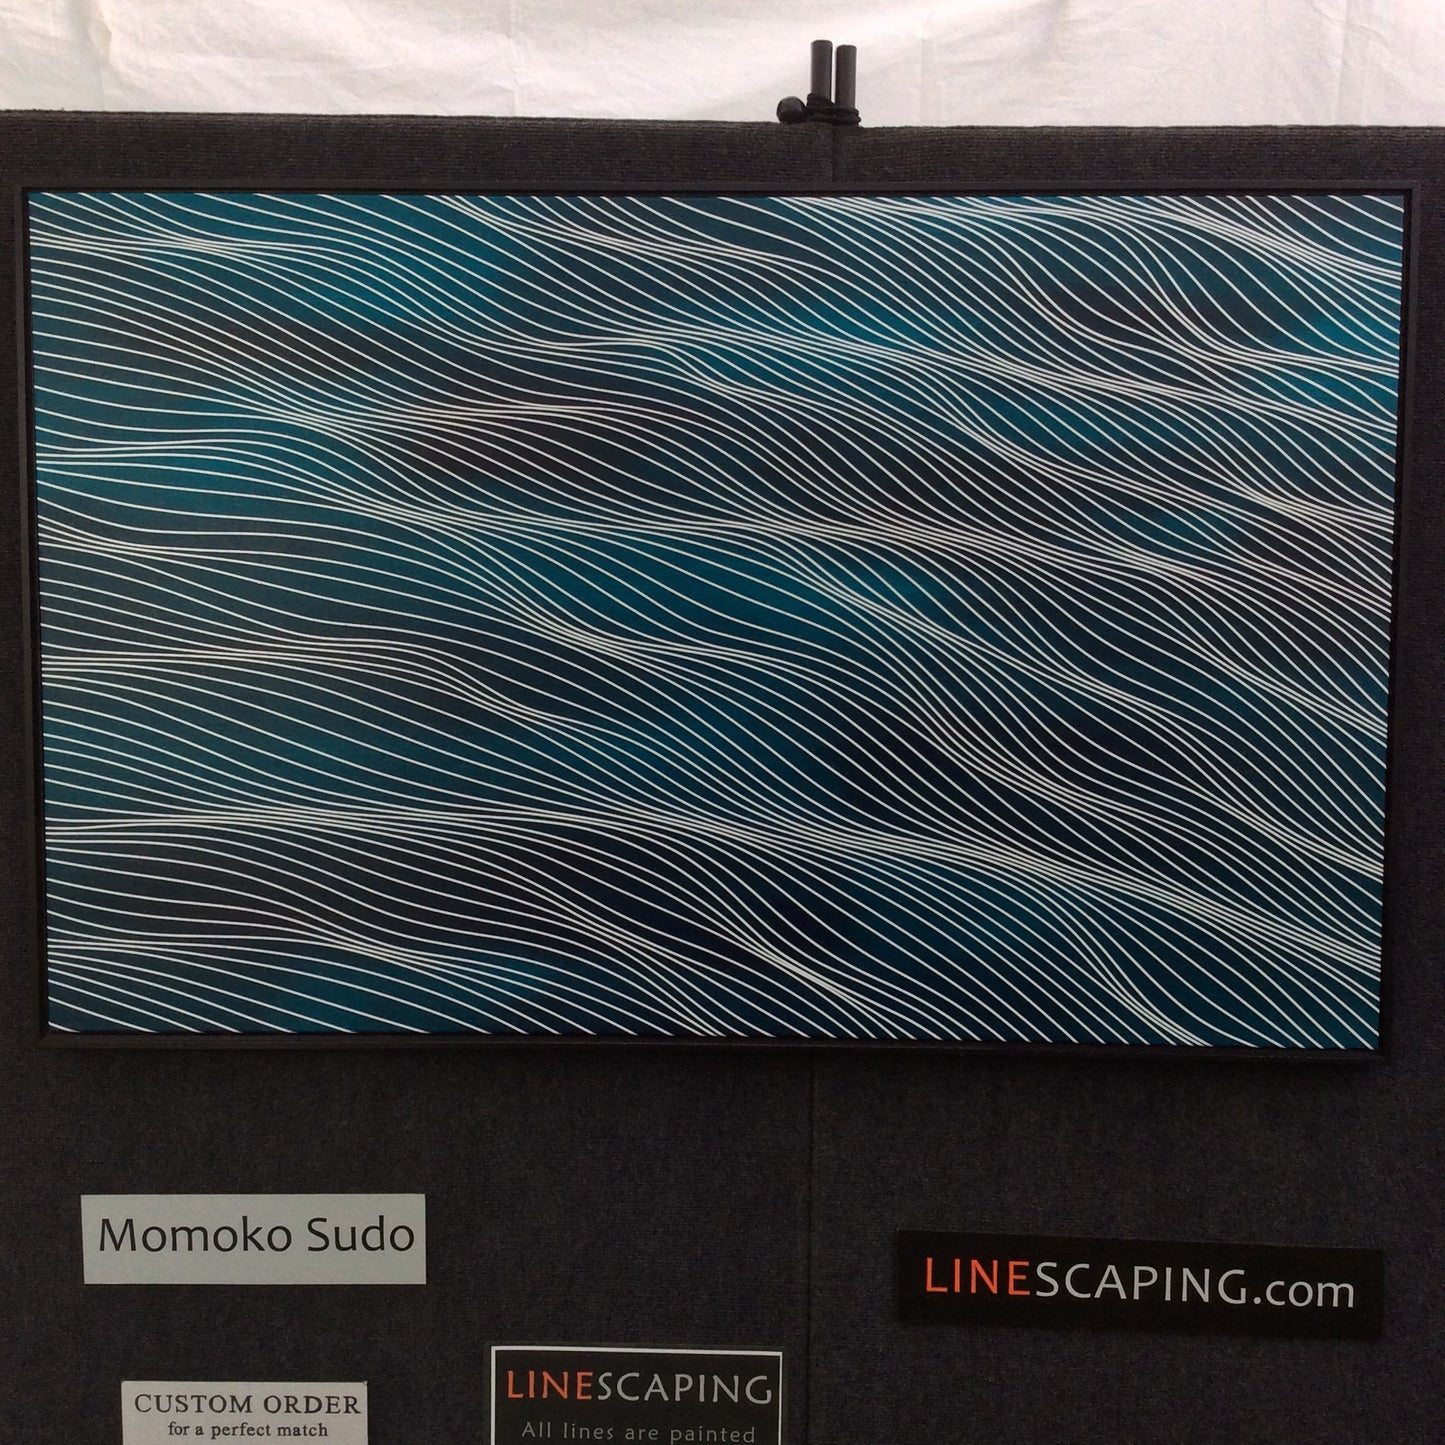 Aqua Turquoise with Black Frame 30x48 (31x49 with frame) - free shipping in USA